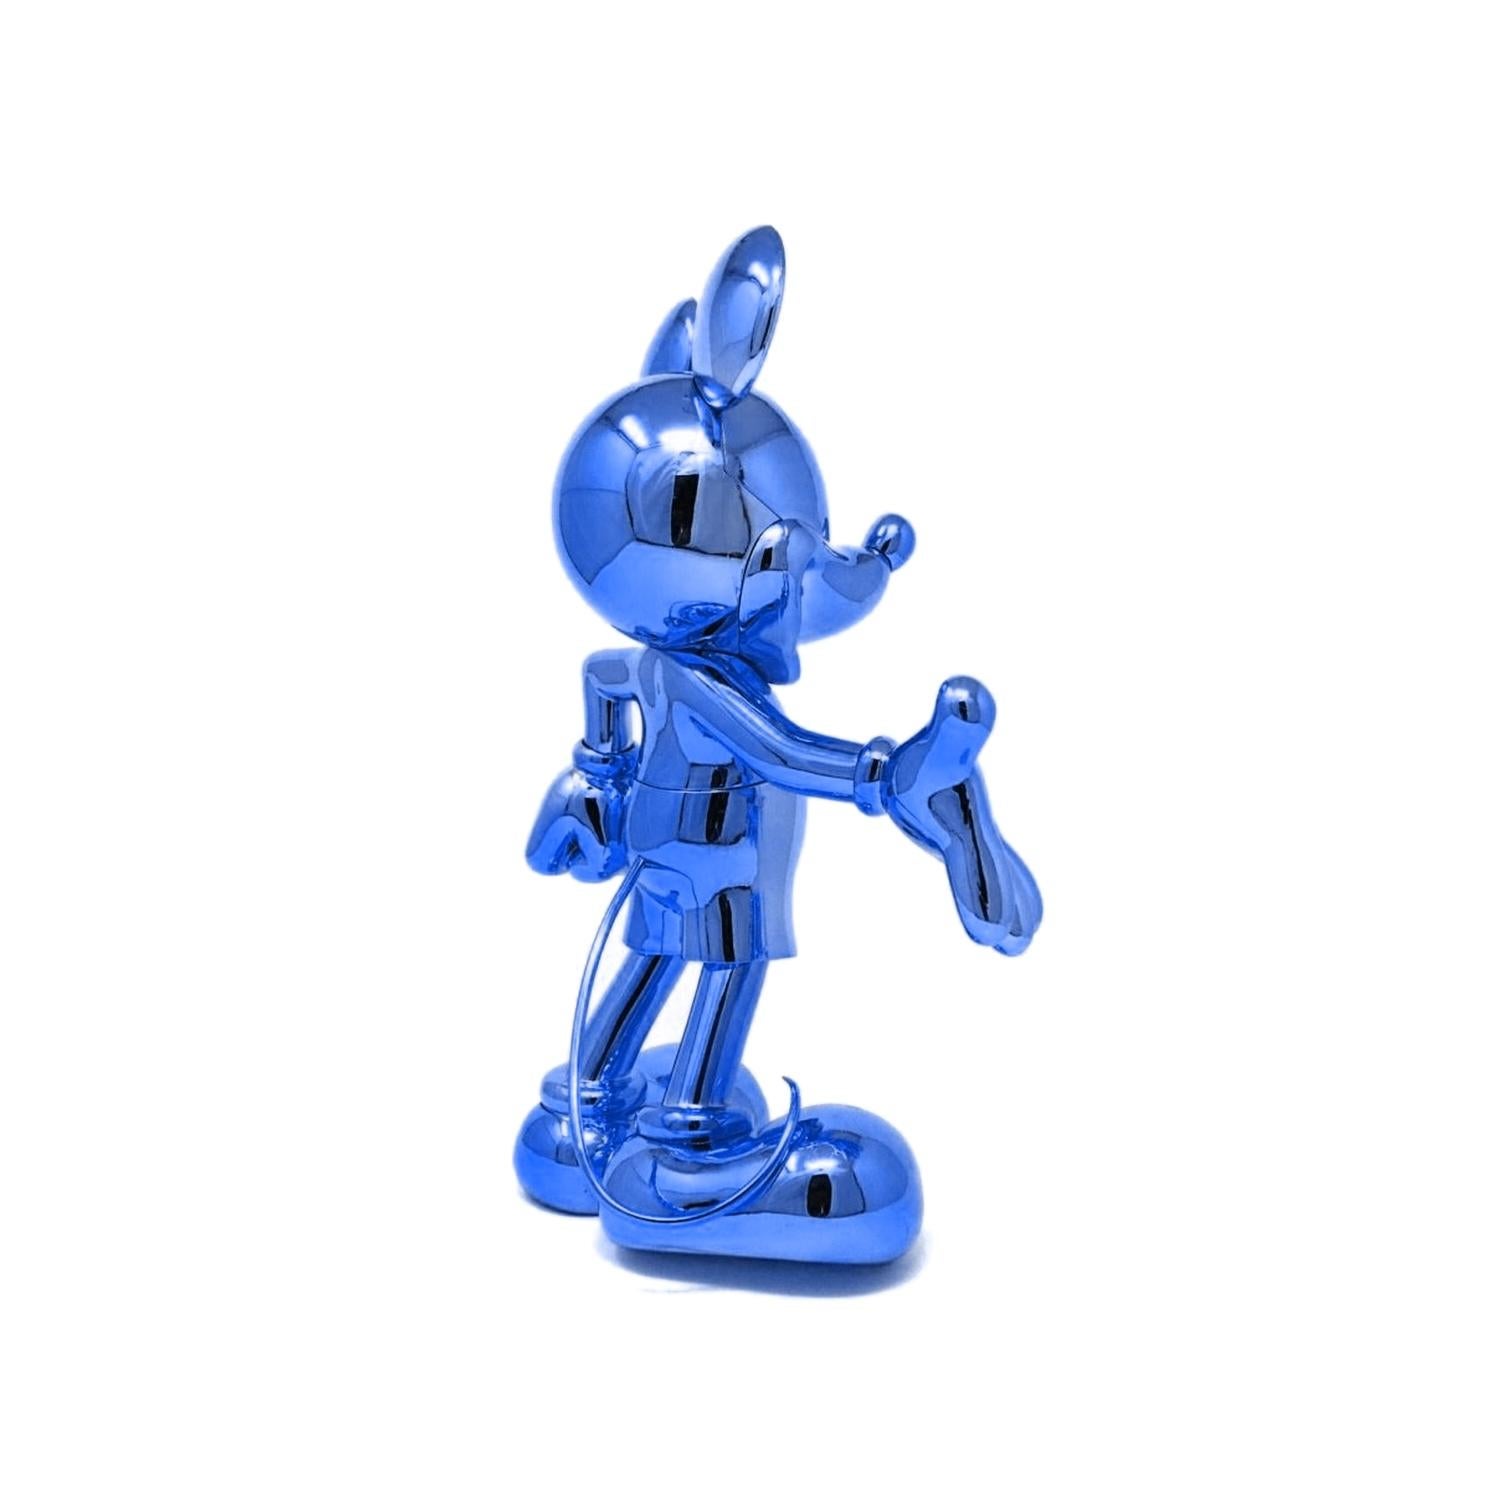 French In Stock in Los Angeles, Mickey Mouse Metallic Chrome Blue Pop Sculpture Figurine